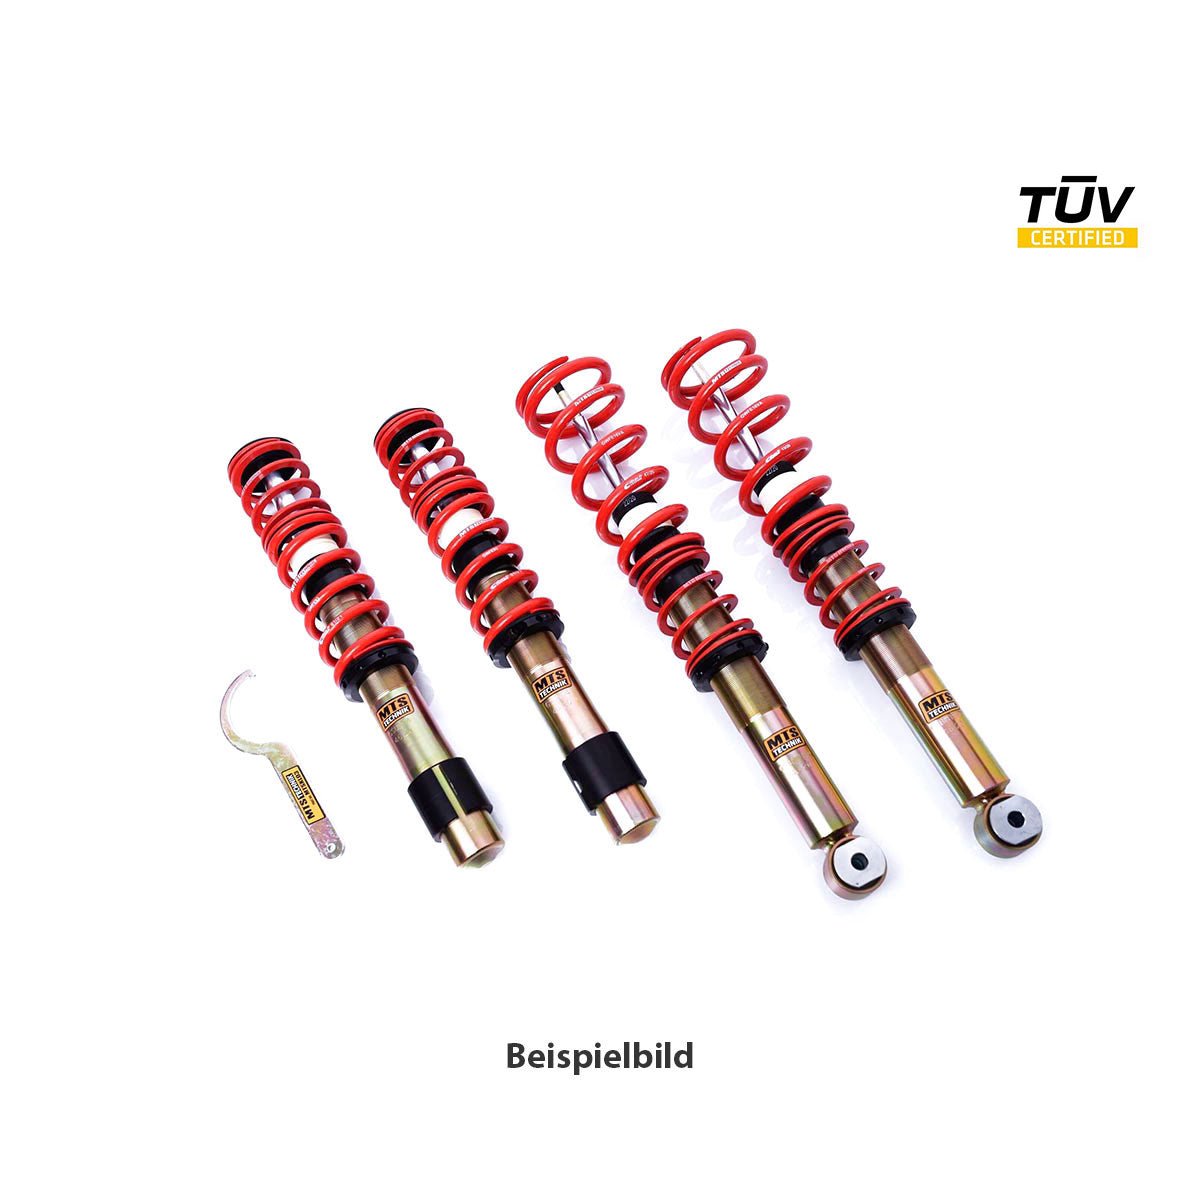 MTS TECHNIK coilover kit SPORT BMW Z4 Roadster E85 (with TÜV) - PARTS33 GmbH